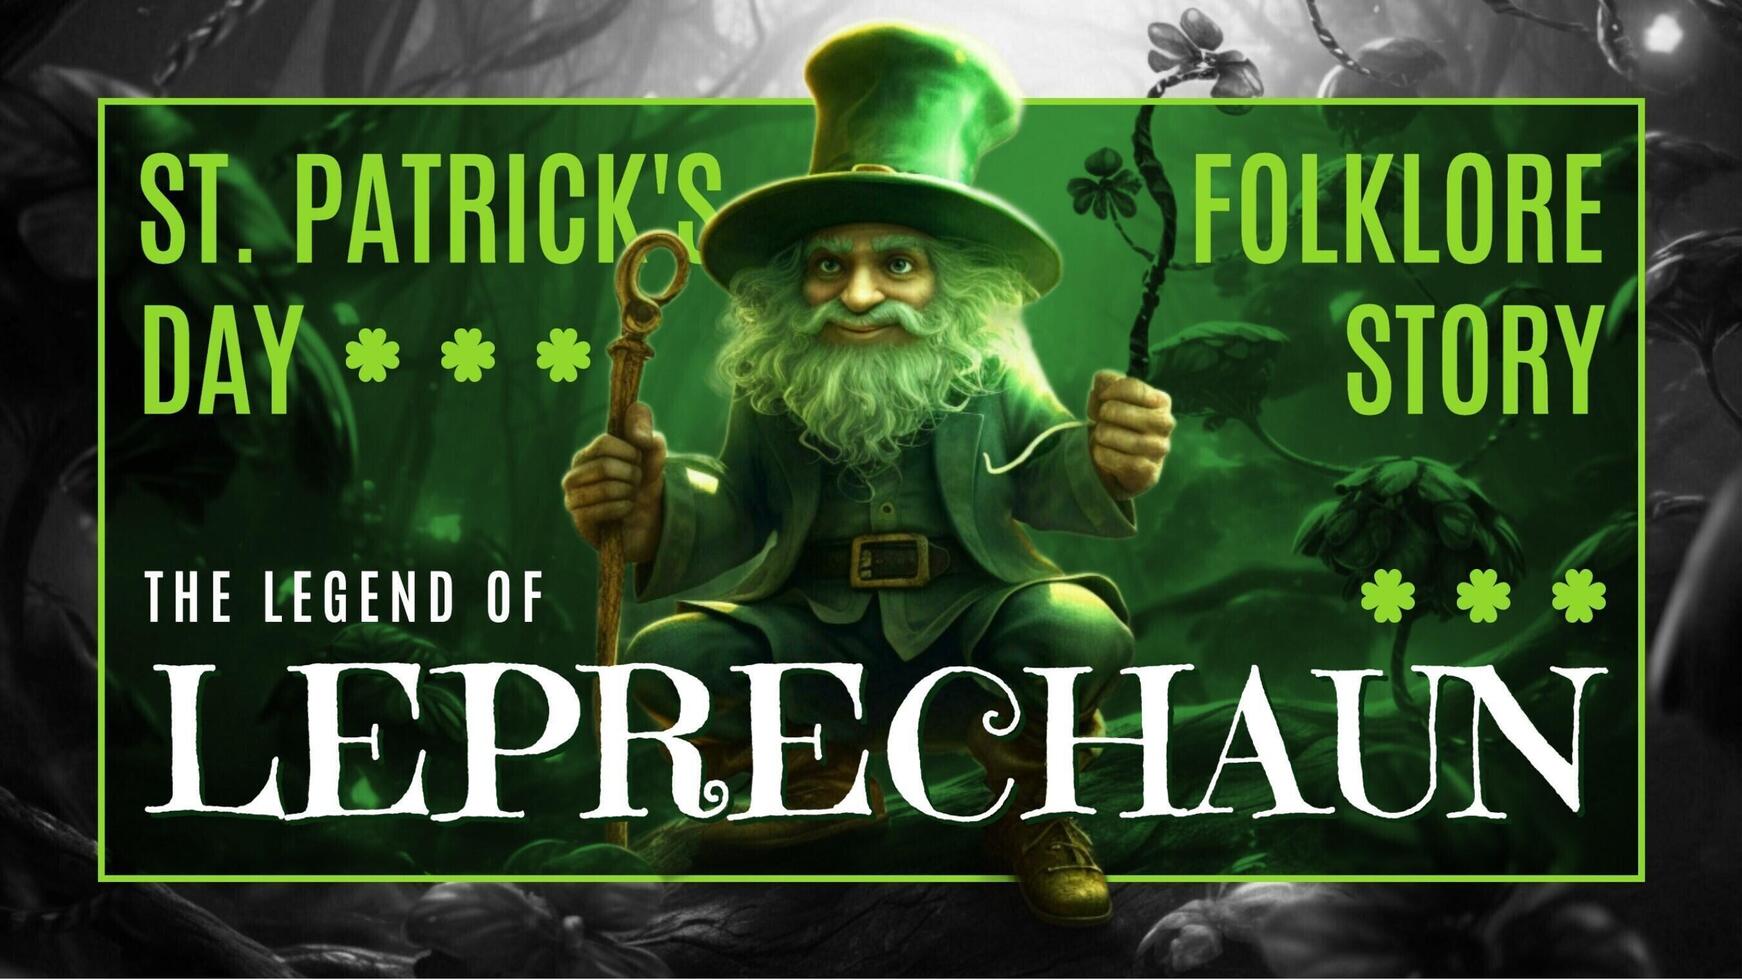 St. Patrick's Day Folklore Story about The Legend Of Leprechaun for Youtube Thumbnail template